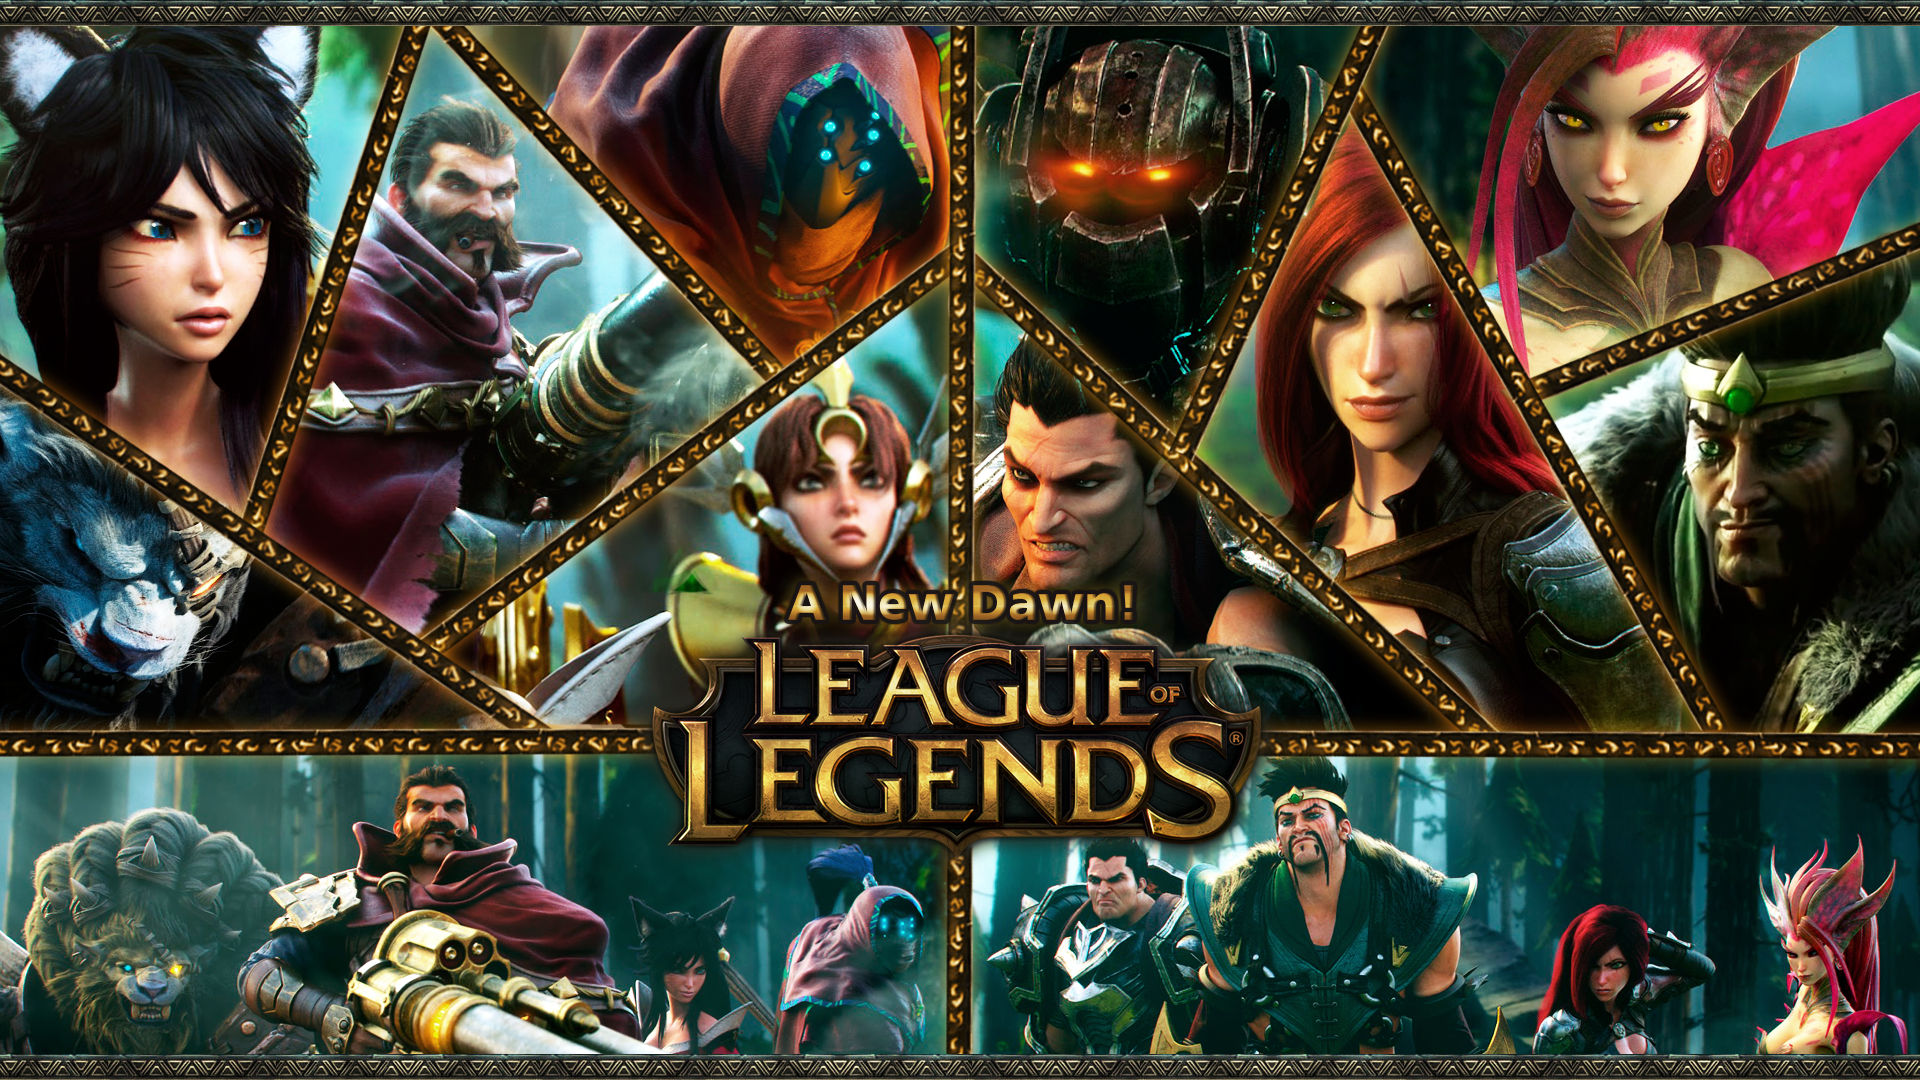 Copycat Mobile Game Sparks Outrage Among League Legends Players